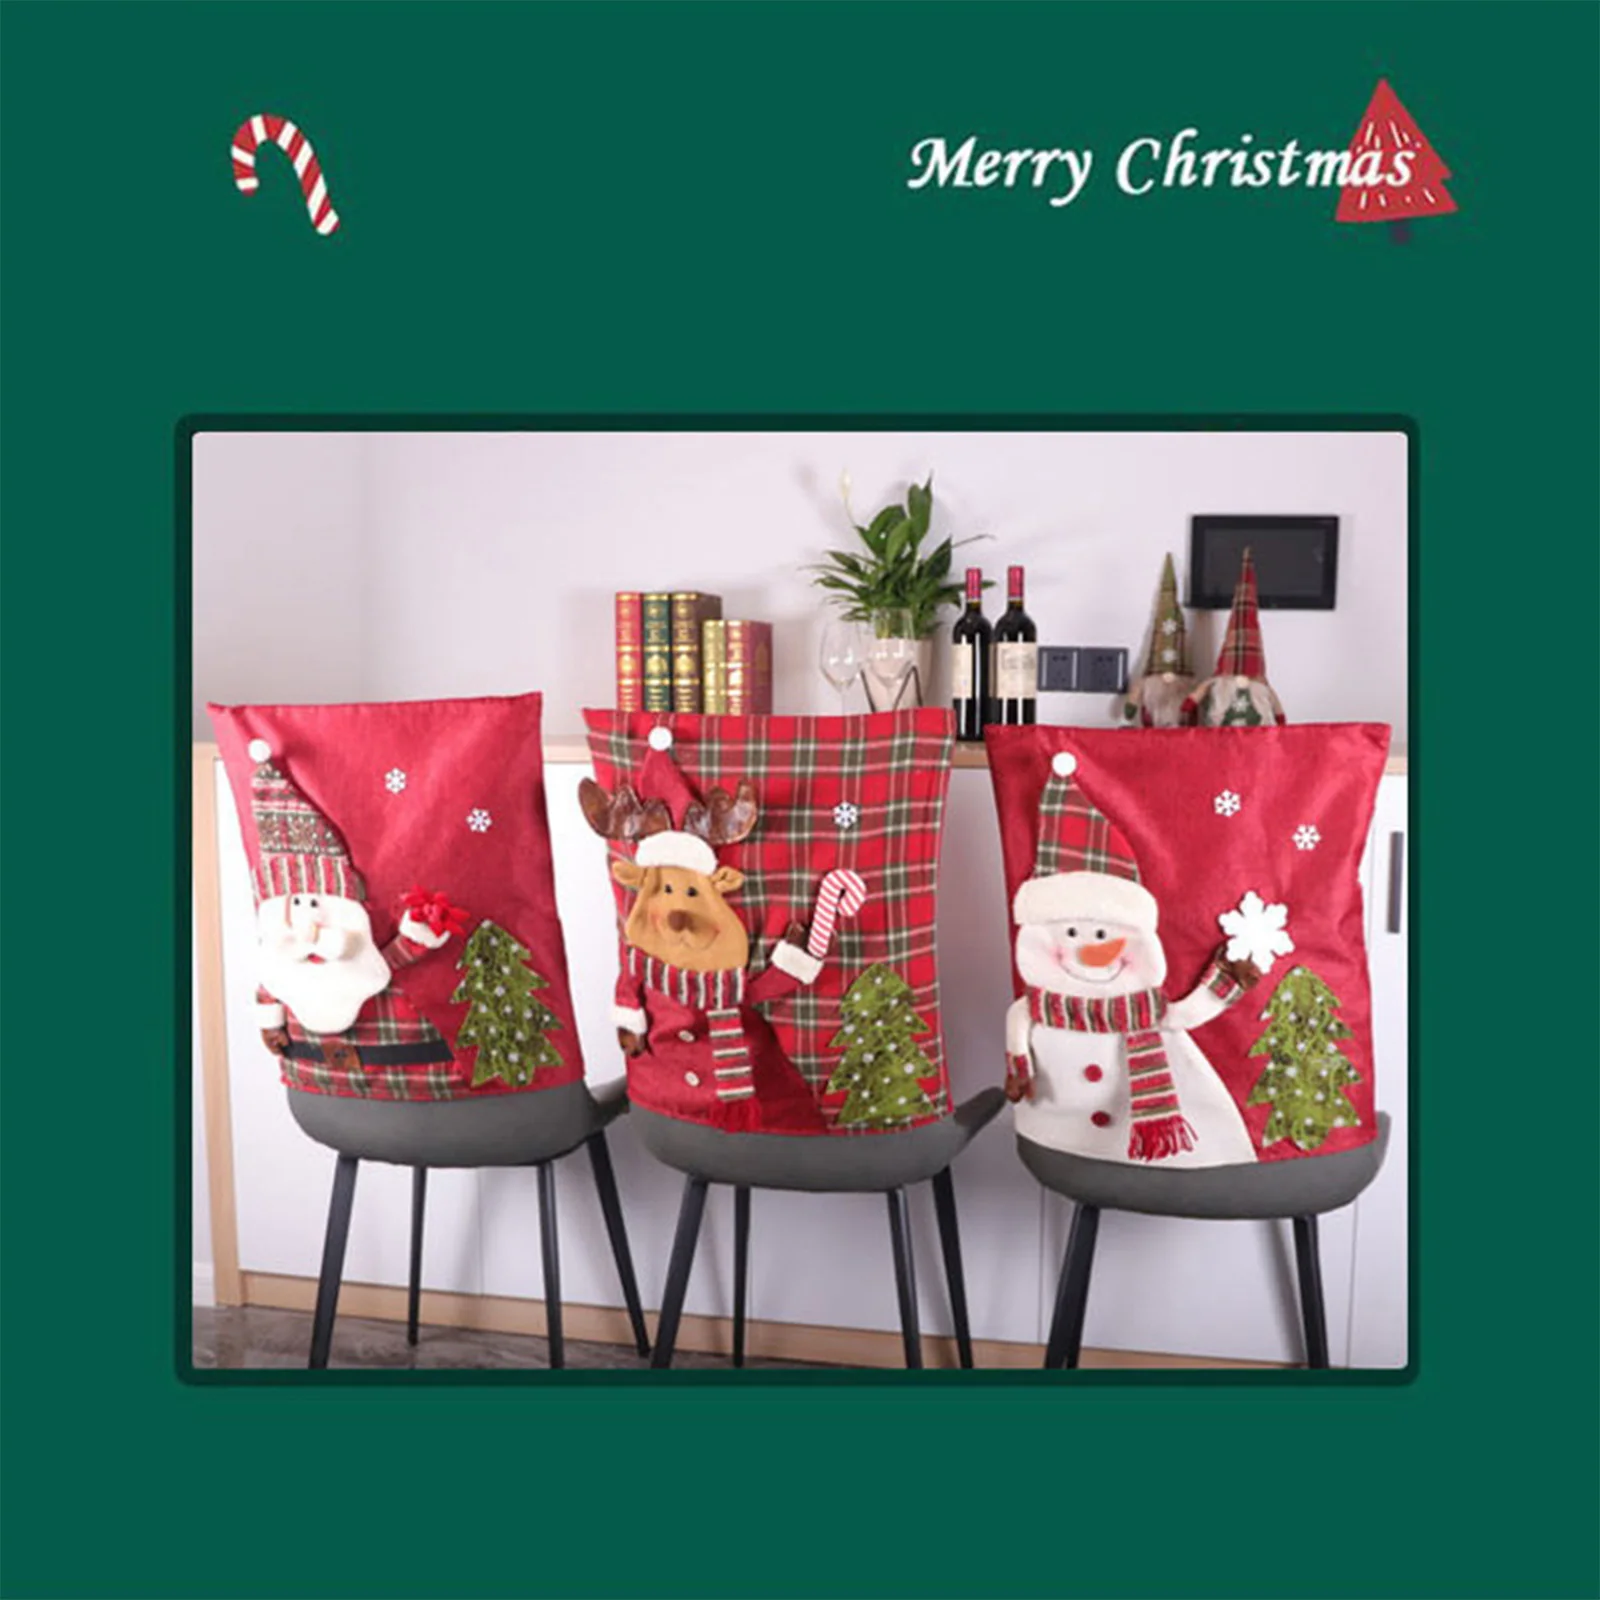 

Christmas Dinner Table Decoration Chair Cover Santa Claus Snowman Reindeer Dining Chair Slipcovers Xmas Party Decor Supplies